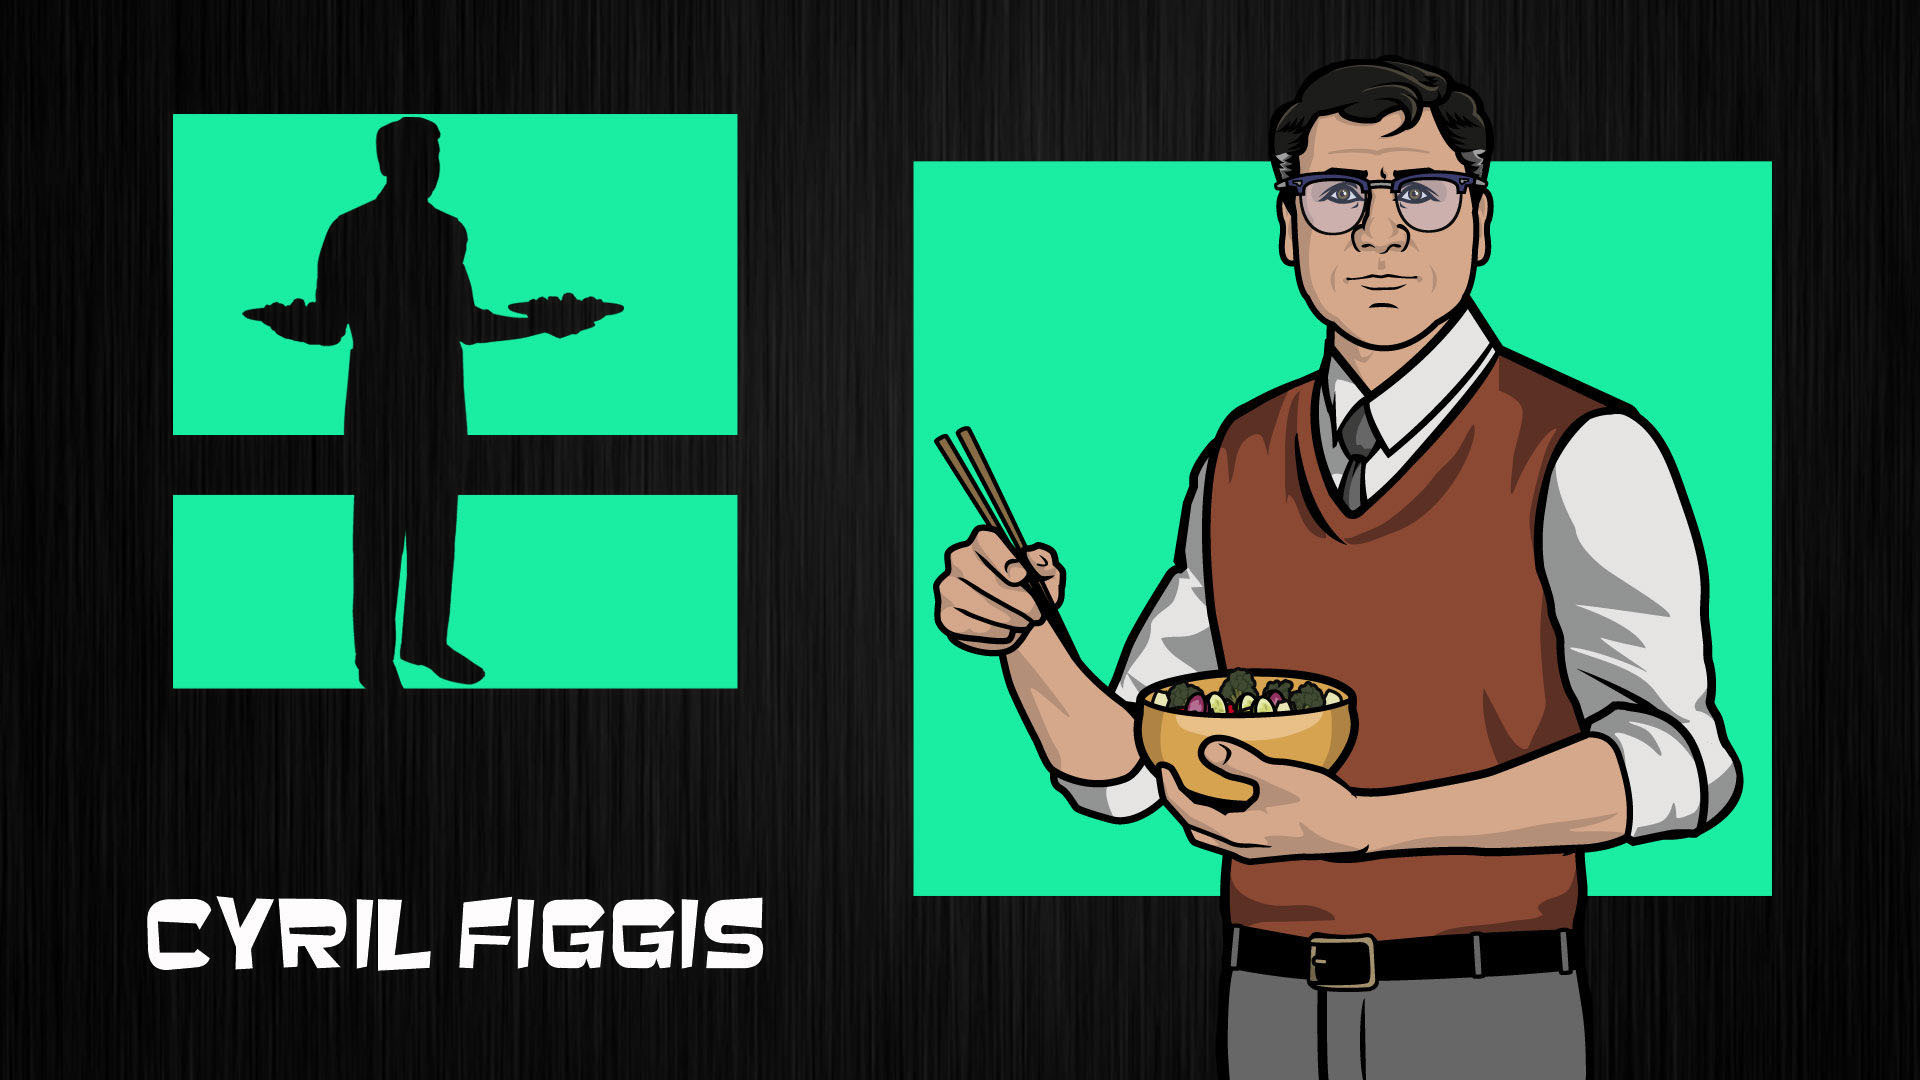 1920x1080 Cyril Figgis, voiced by Chris Parnell